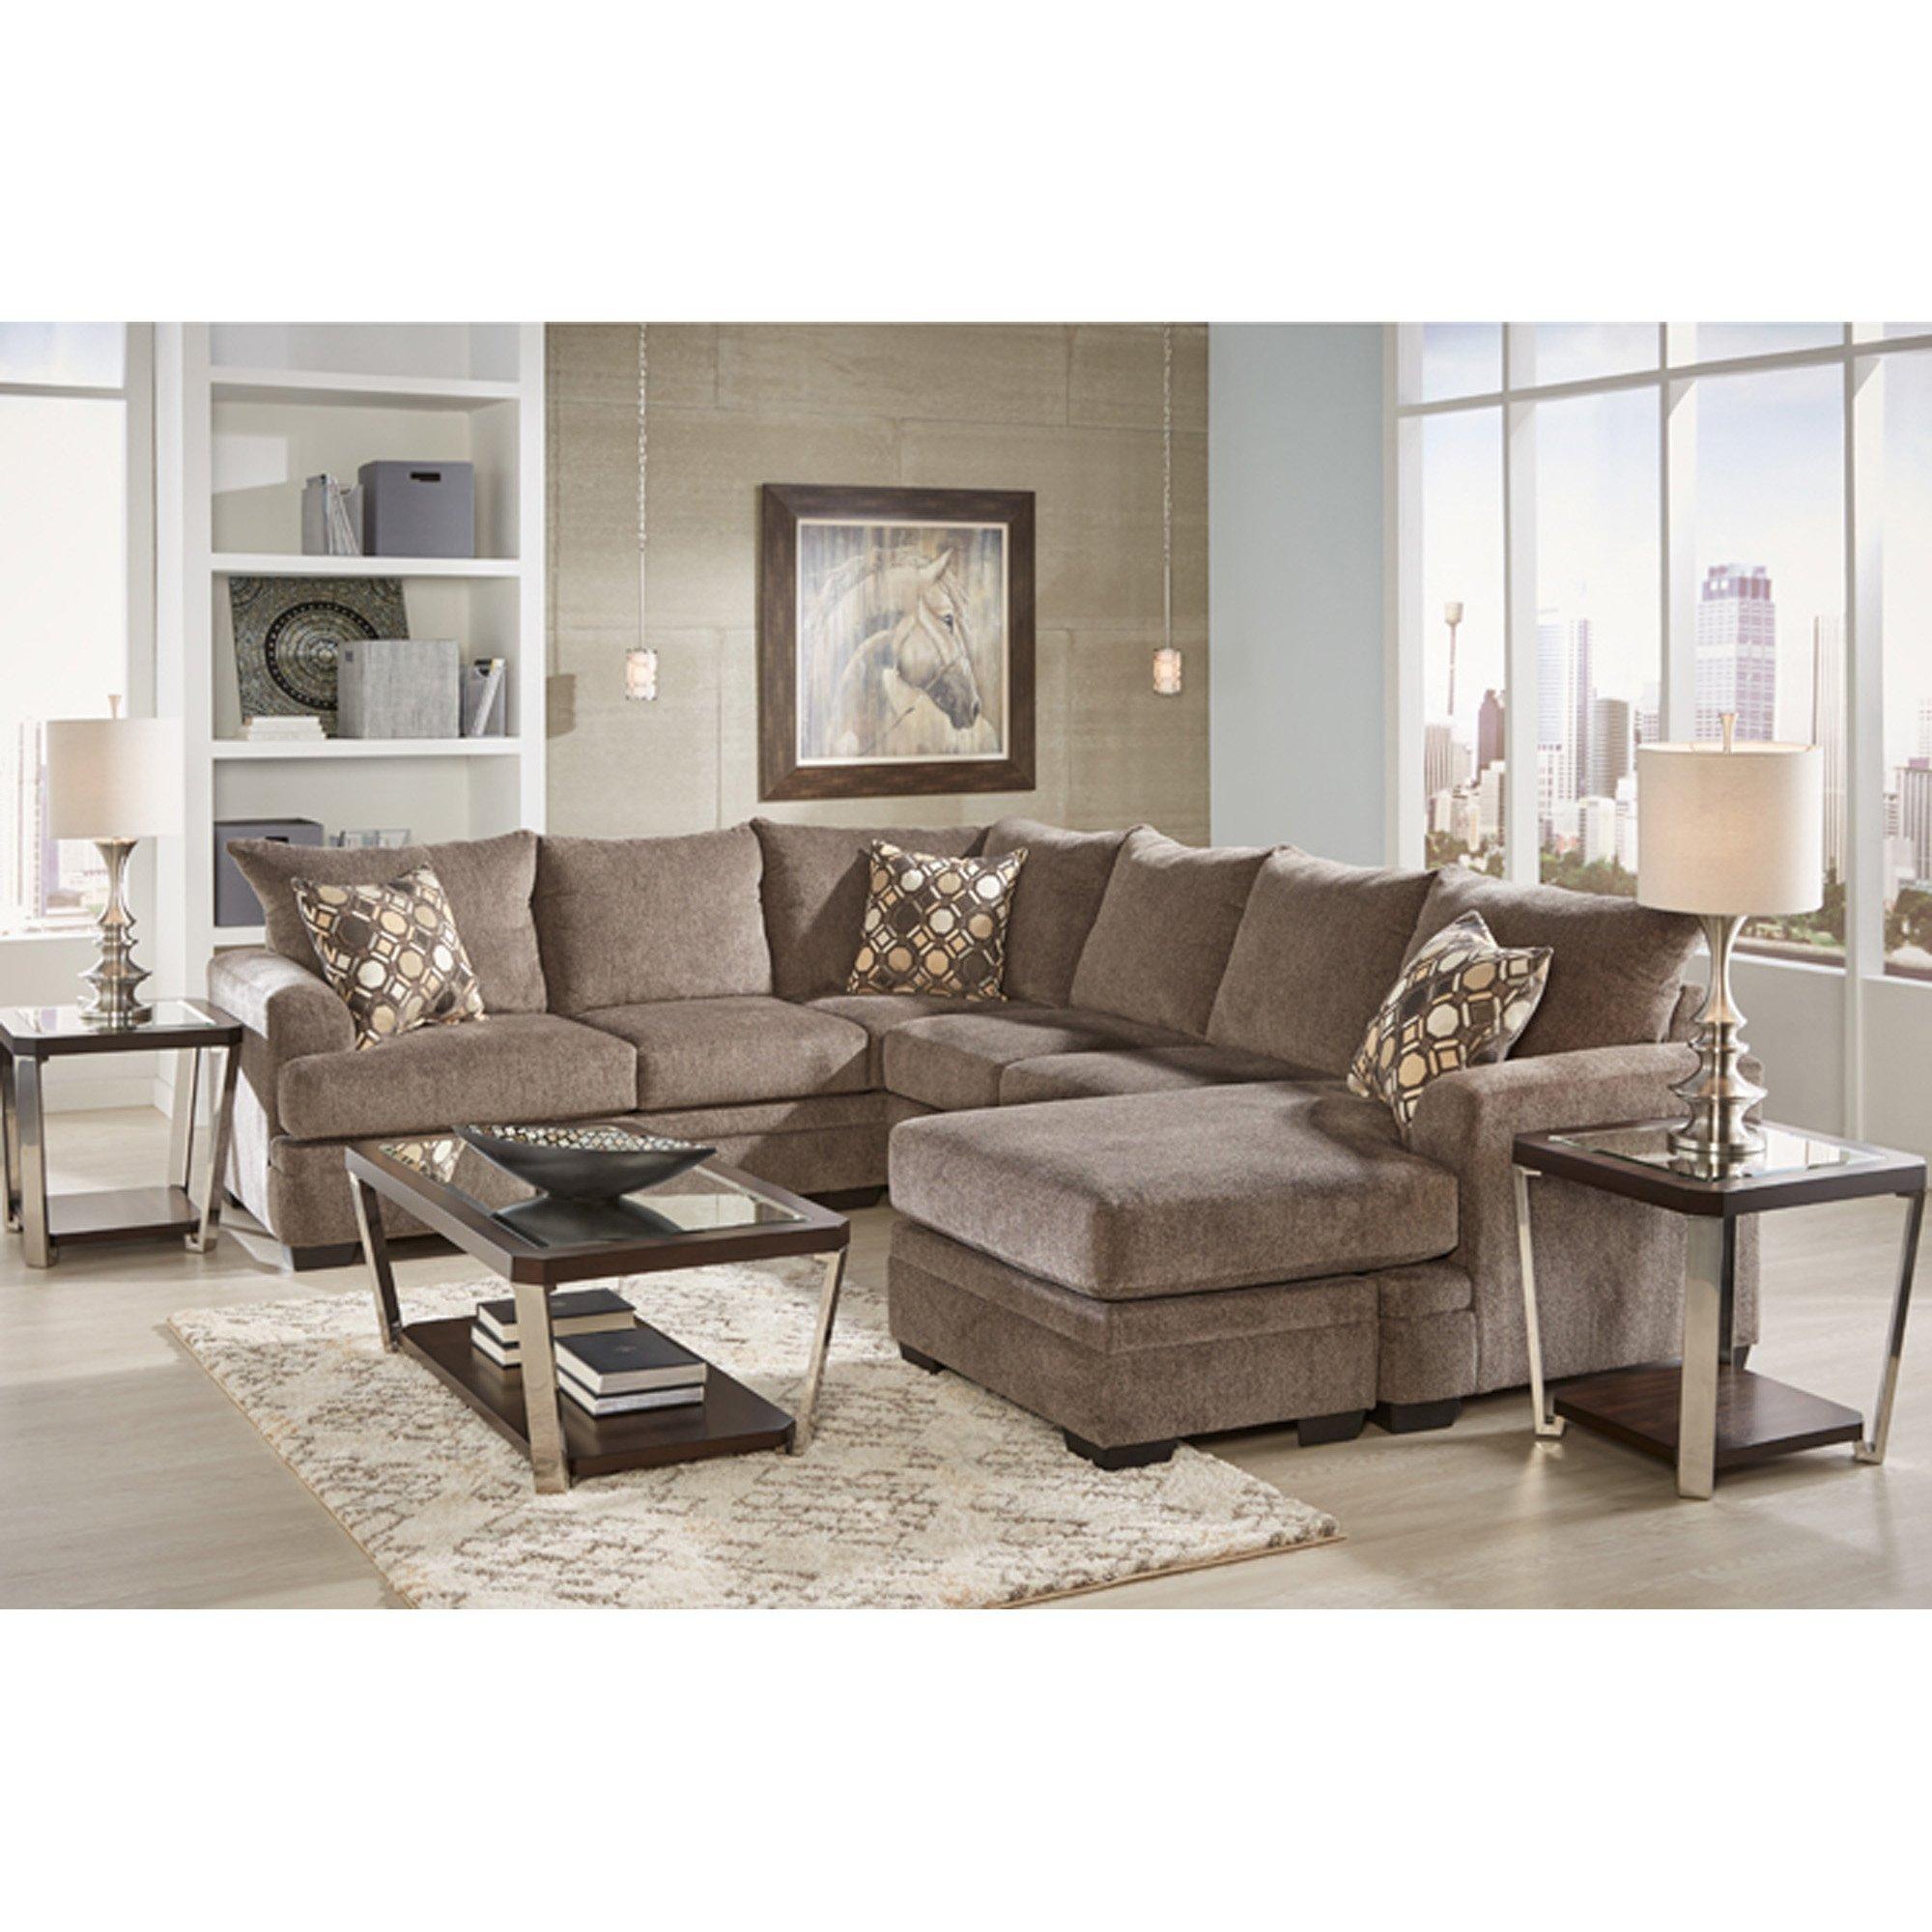 Rent To Own Woodhaven 2 Piece Kimberly Sectional Living Room Collection At Aarons Today